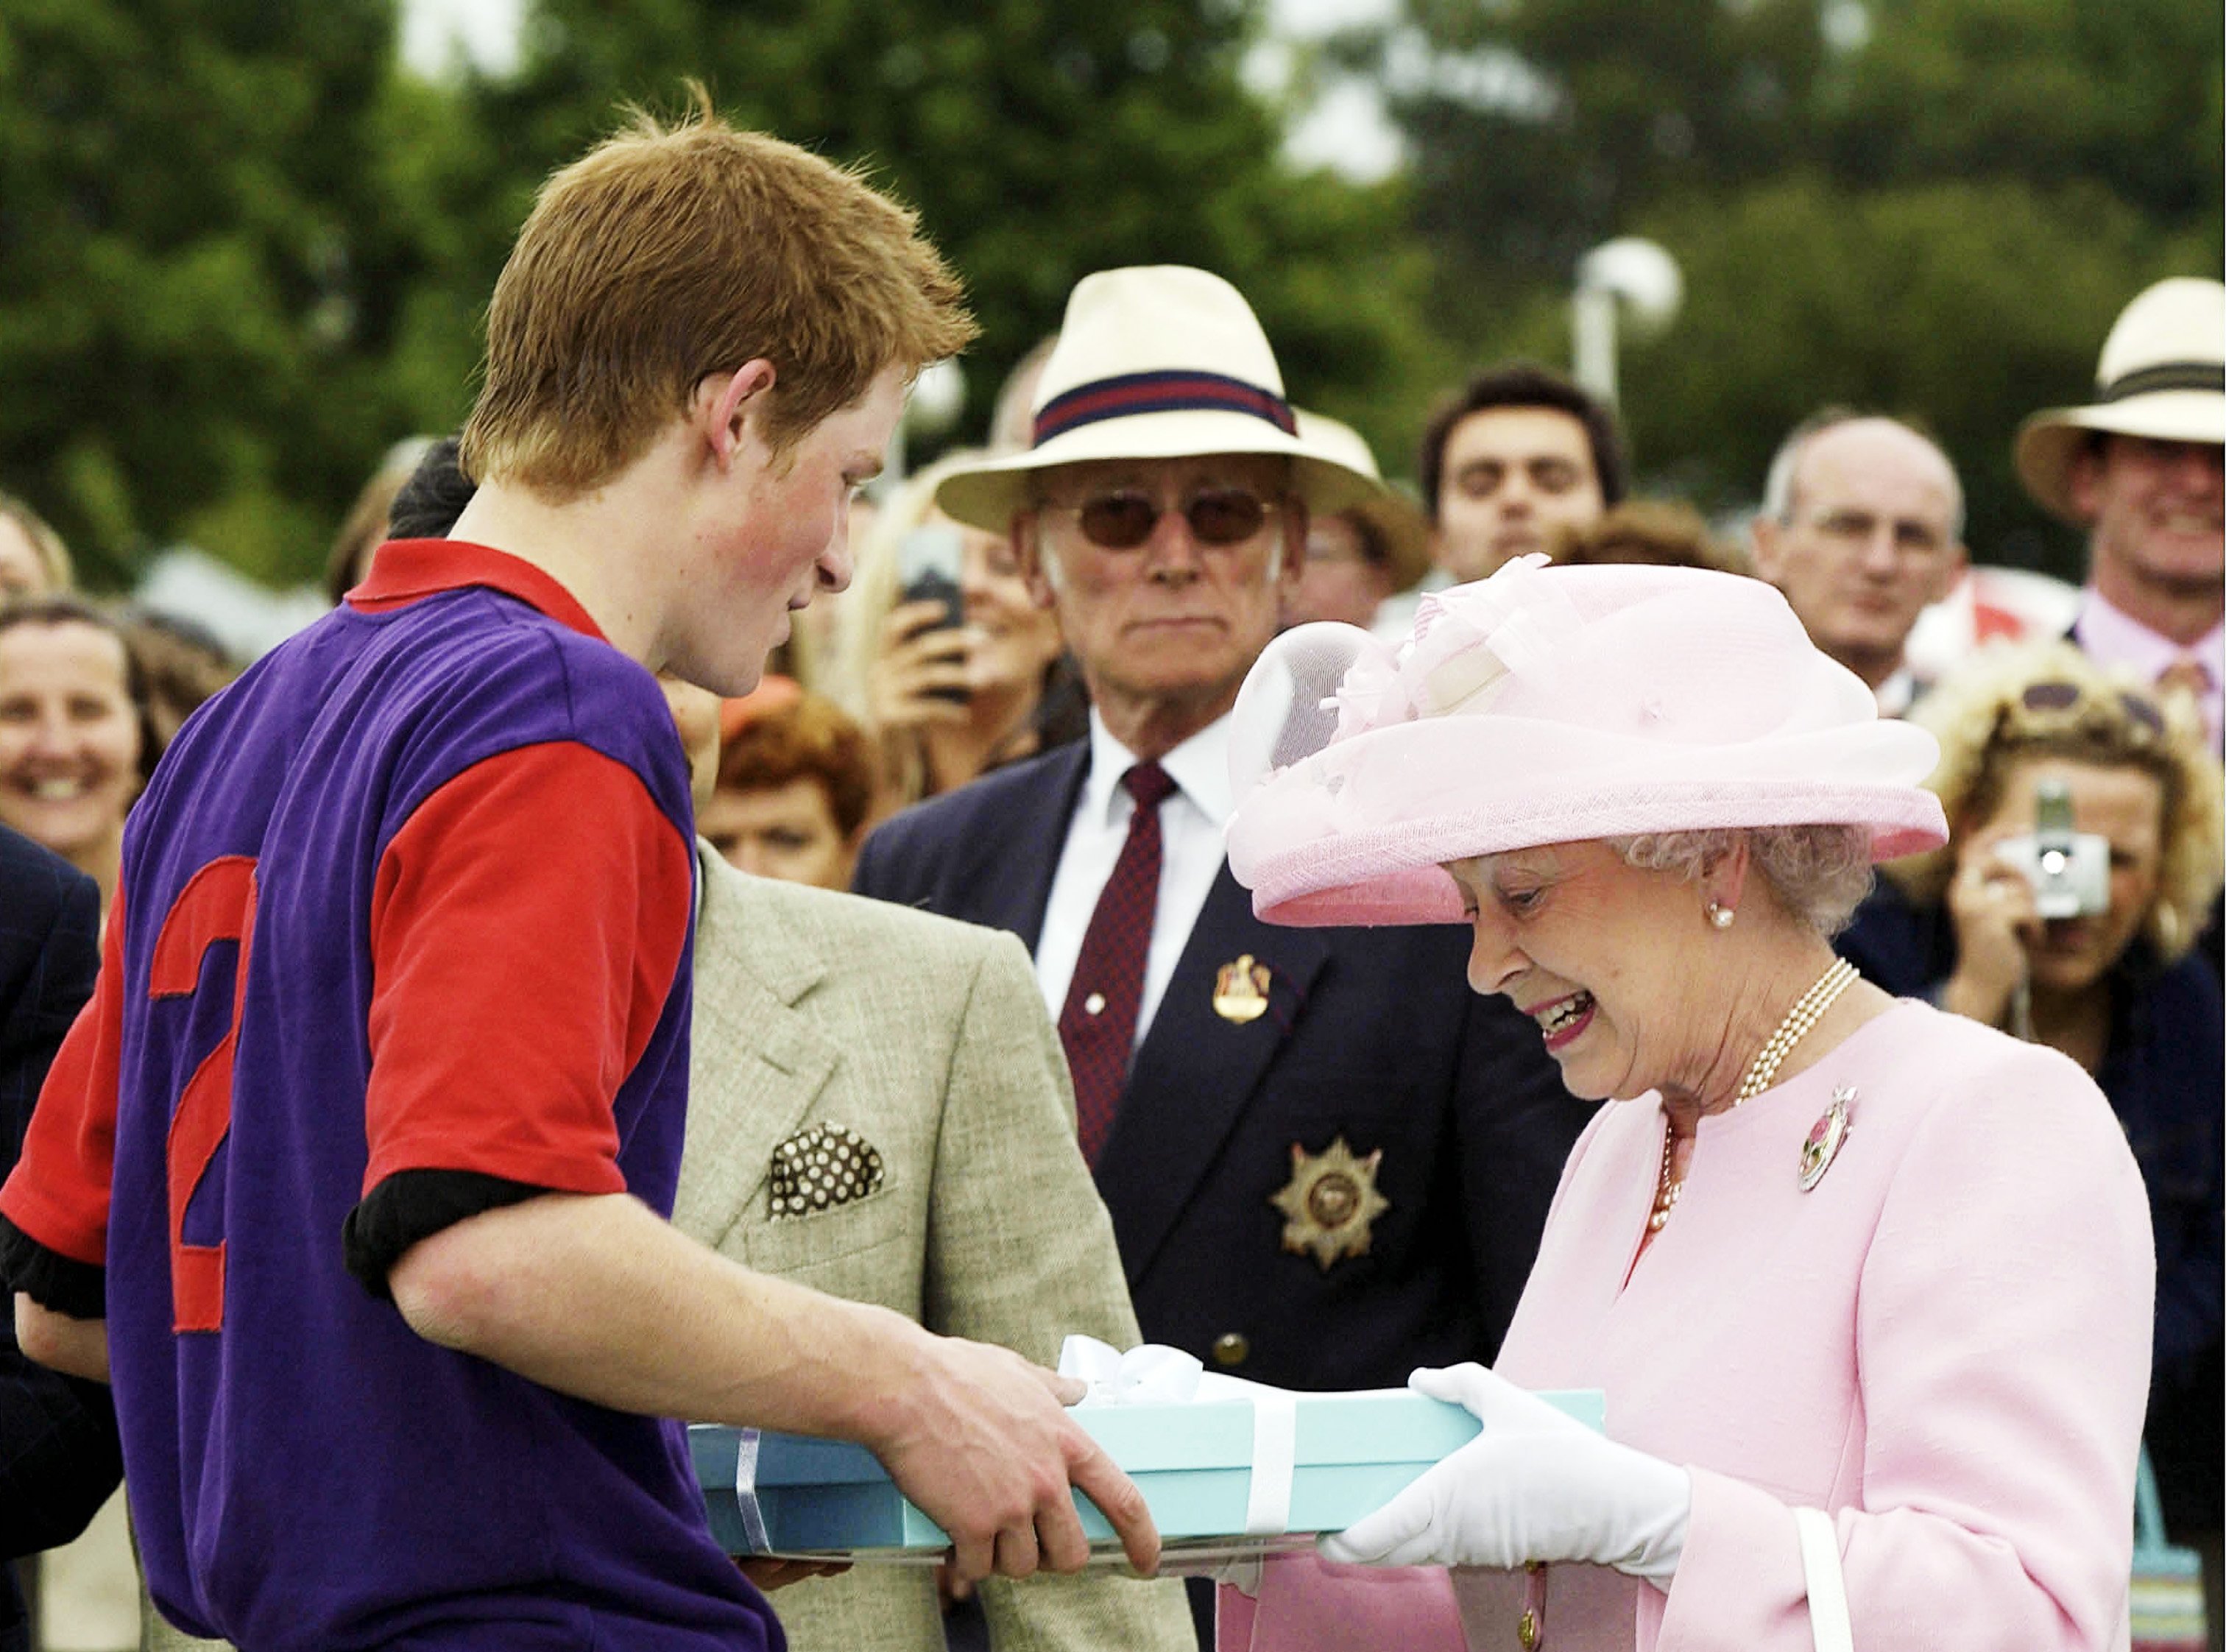 Queen Elizabeth II makes a presentation to Prince Harry after a polo match during Royal Ascot on June 18, 2003 in Windsor, England | Source: Getty Images 